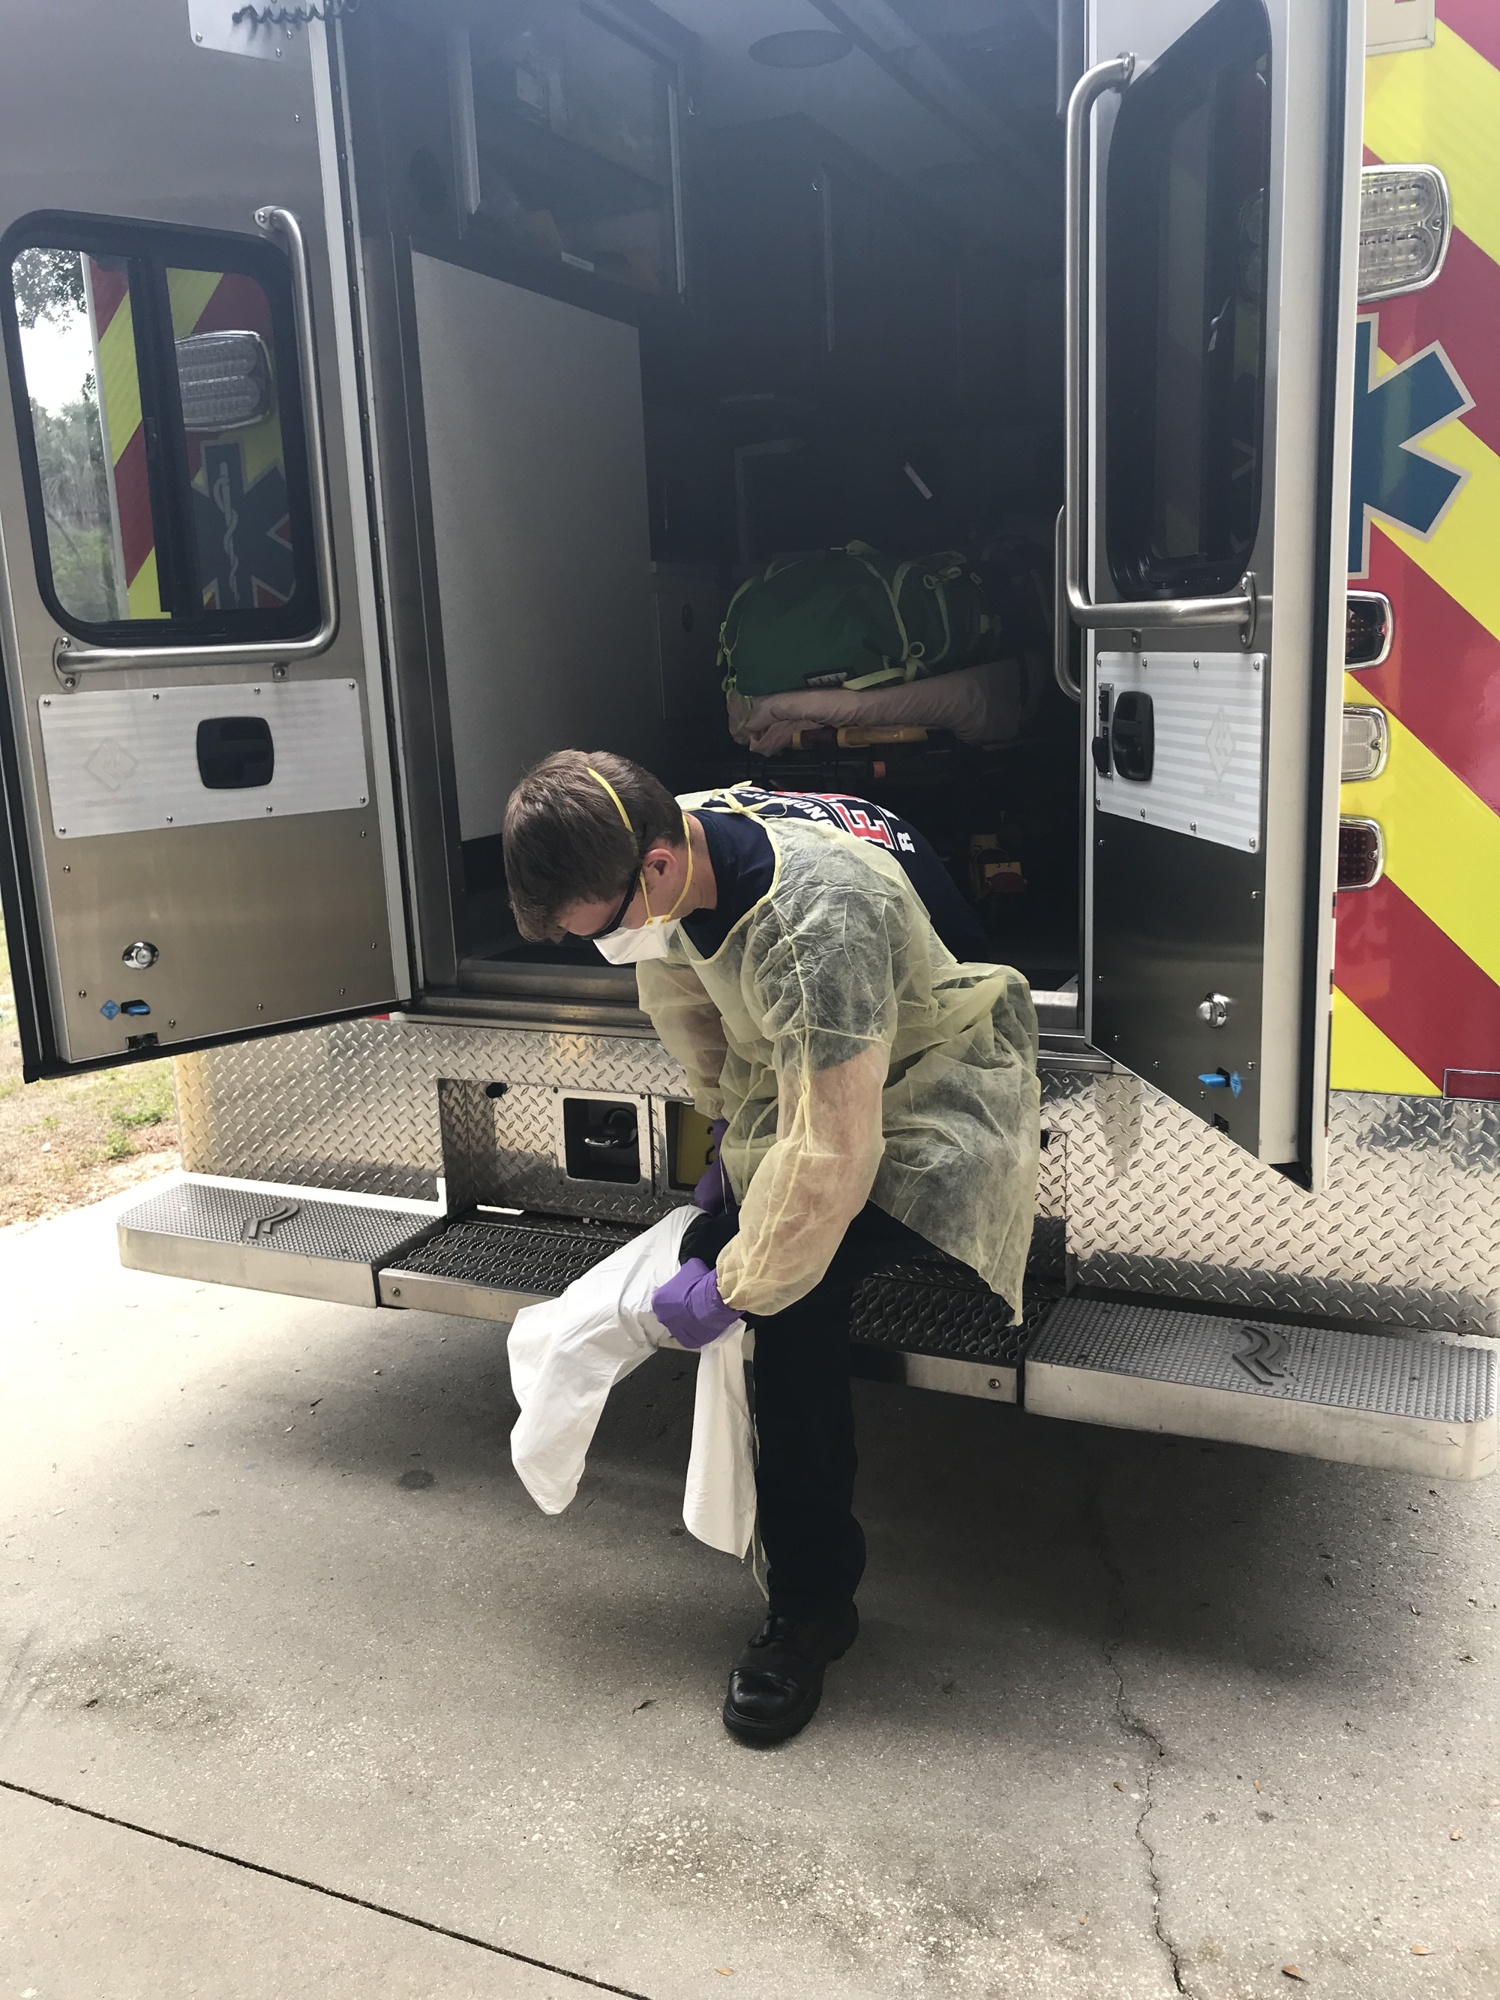 Longboat Key firefighter and paramedic David Oliger is pictured adjusting his equipment.